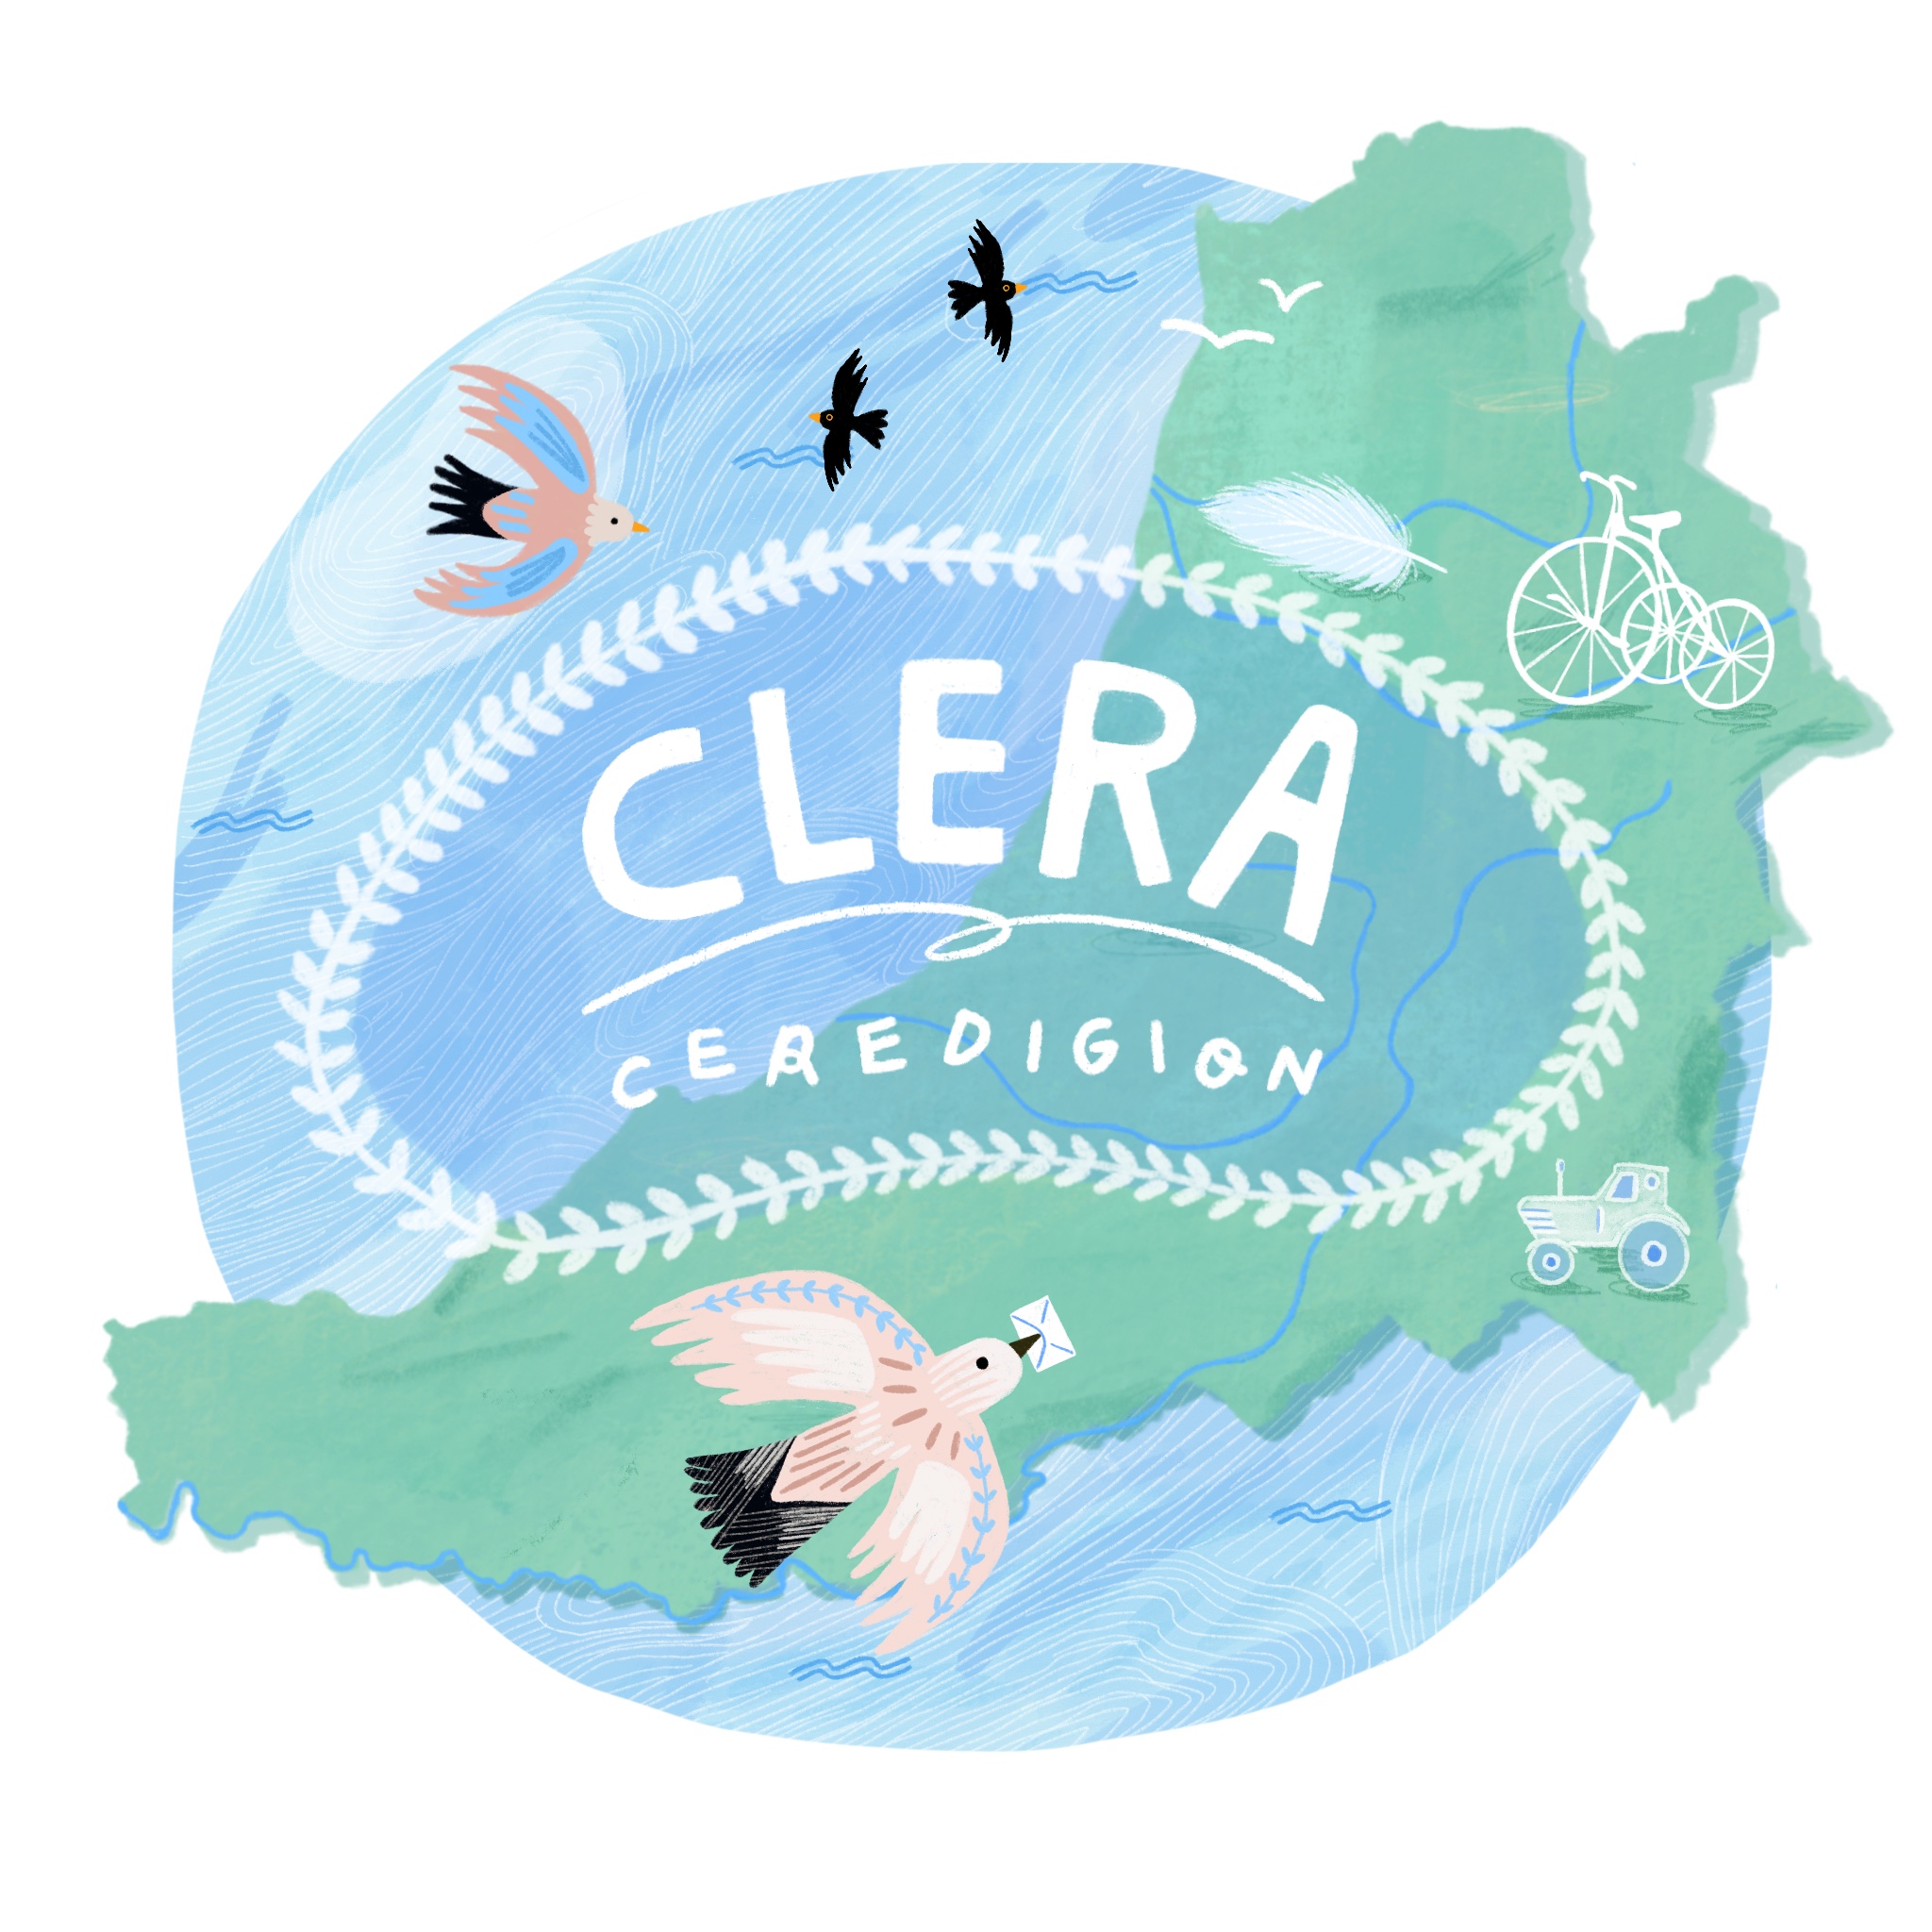 CLERA Ceredigion – Your Story in Your Location